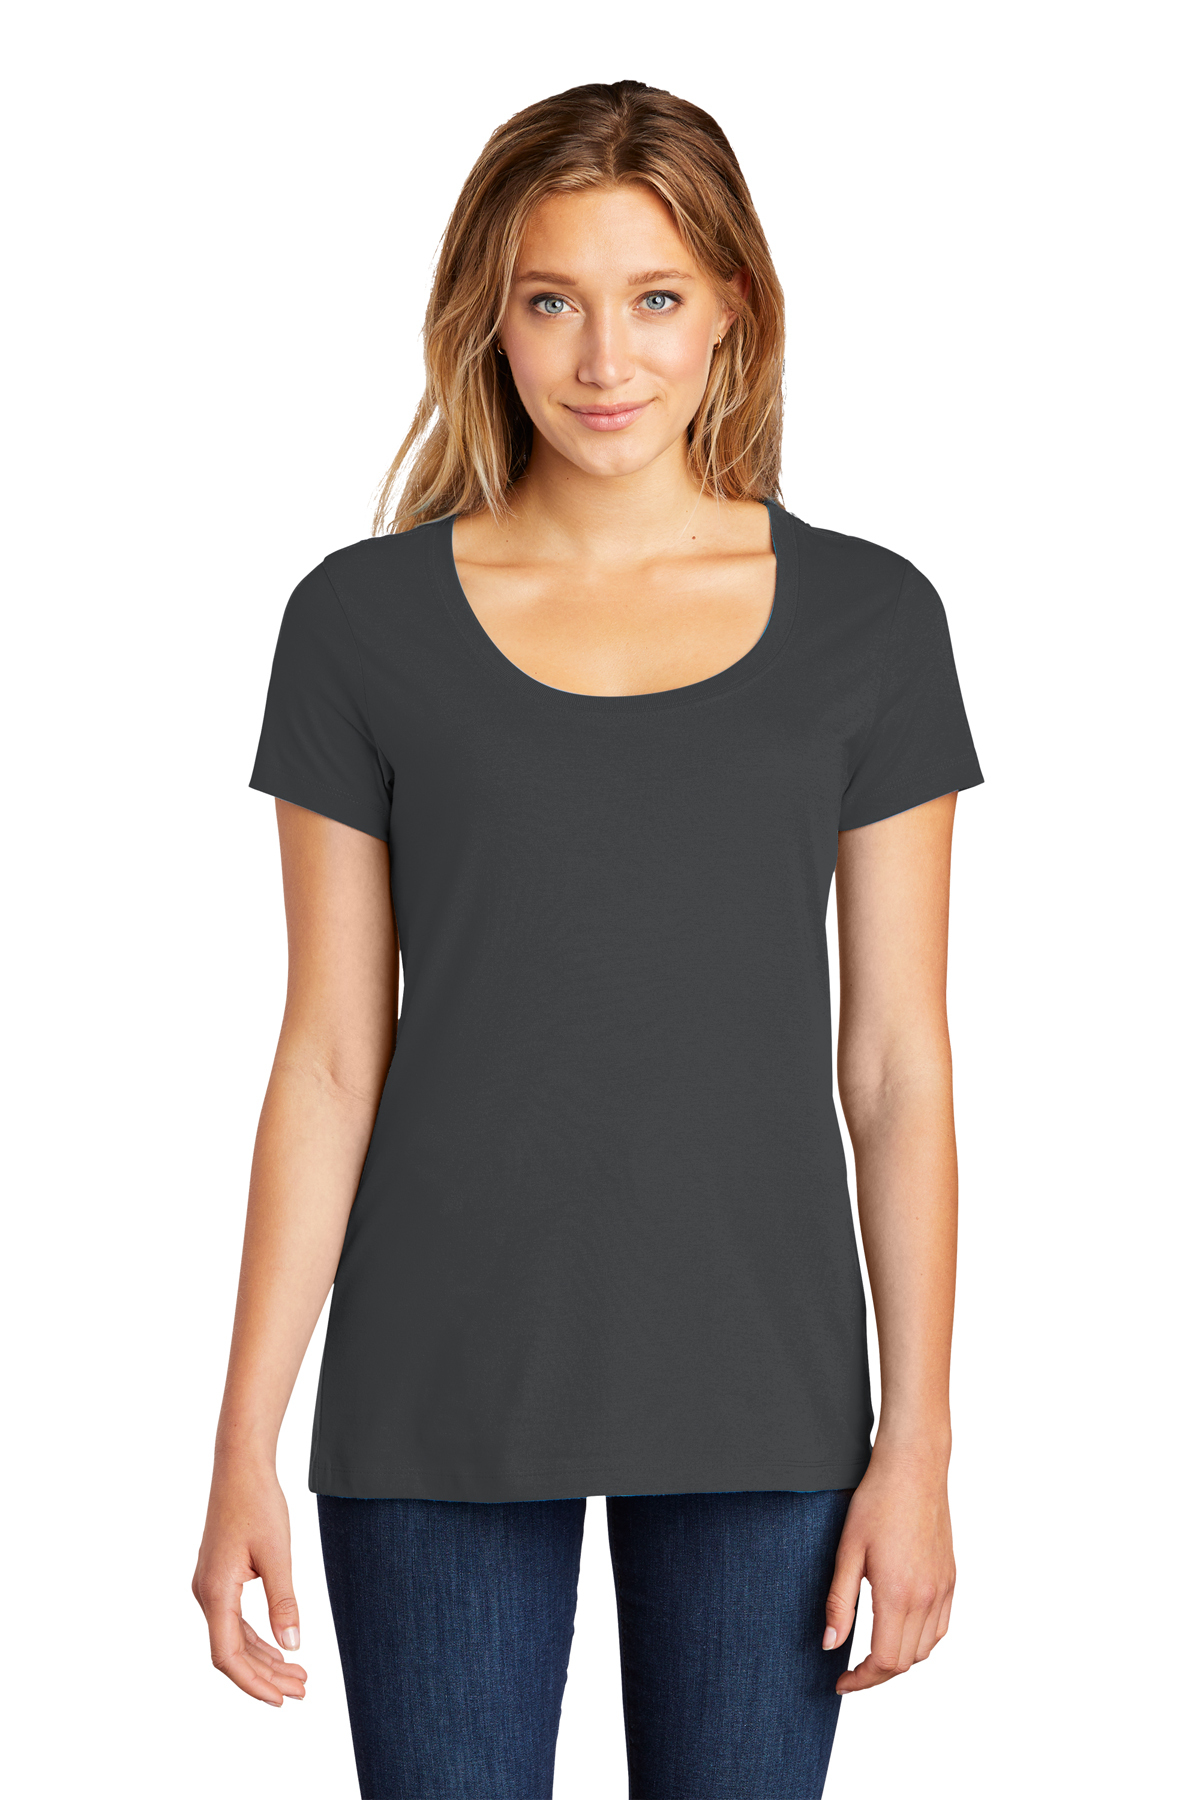 District Women's Perfect Weight Scoop Neck Tee | Product | District